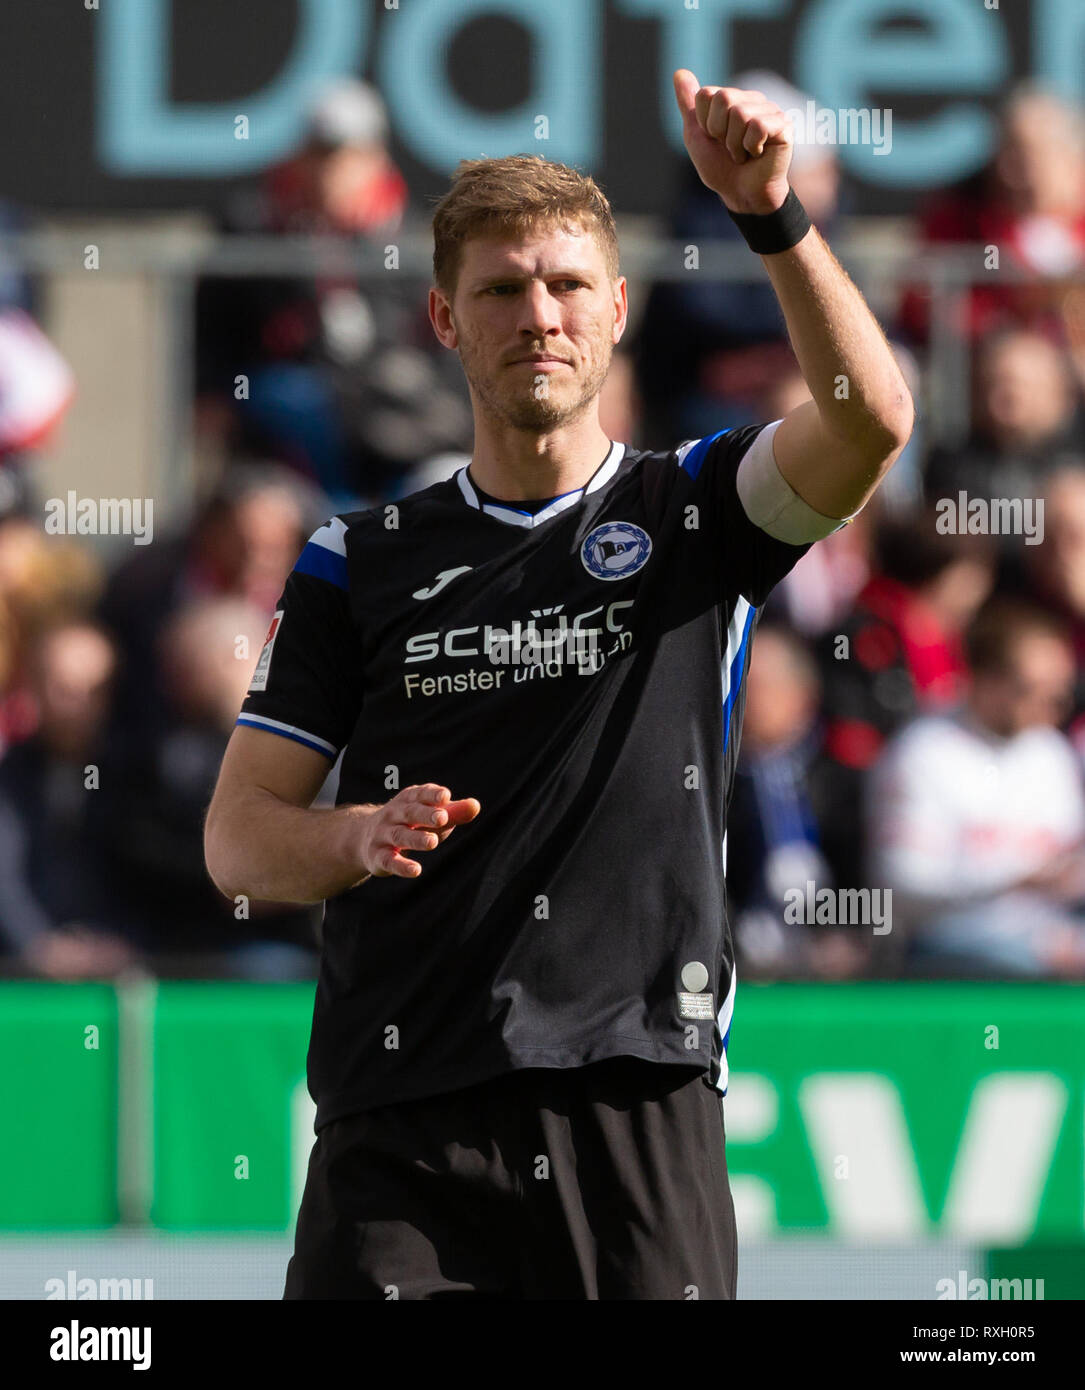 Cologne, Germany, March 9 2019, second league, 1. FC Koeln vs Arminia Bielefeld: Fabian Klos (Arminia) gestures.    DFL REGULATIONS PROHIBIT ANY USE OF PHOTOGRAPHS AS IMAGE SEQUENCES AND/OR QUASI-VIDEO             Credit: Juergen Schwarz/Alamy Live News DFL REGULATIONS PROHIBIT ANY USE OF PHOTOGRAPHS AS IMAGE SEQUENCES AND/OR QUASI-VIDEO Credit: Juergen Schwarz/Alamy Live News Stock Photo